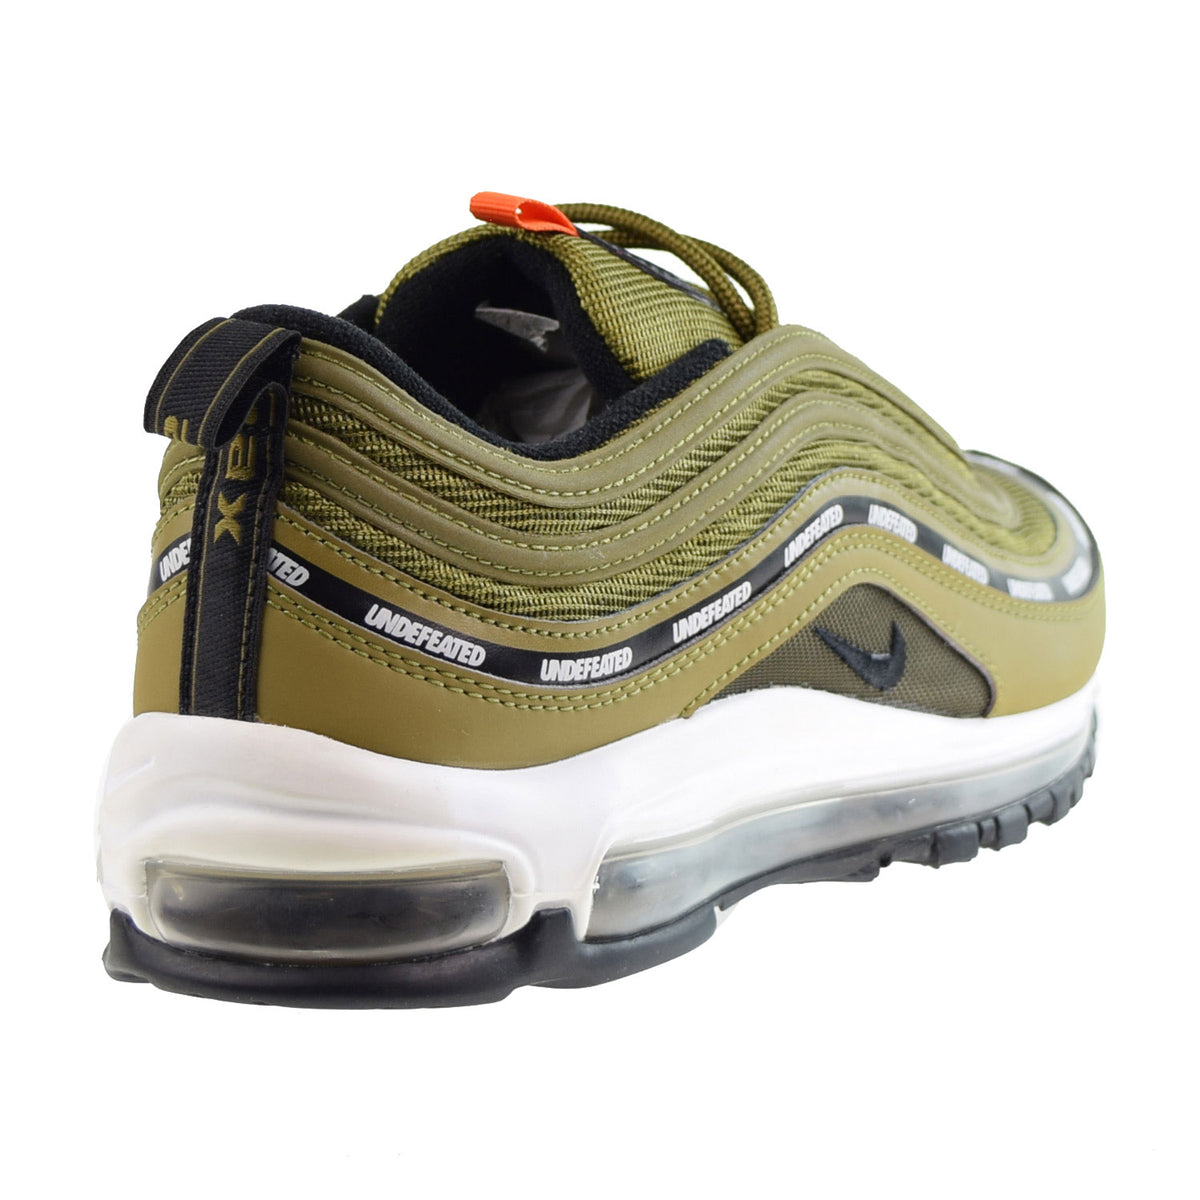 Nike Air Max 97 Undefeated Men's Shoes Black-Militia Green